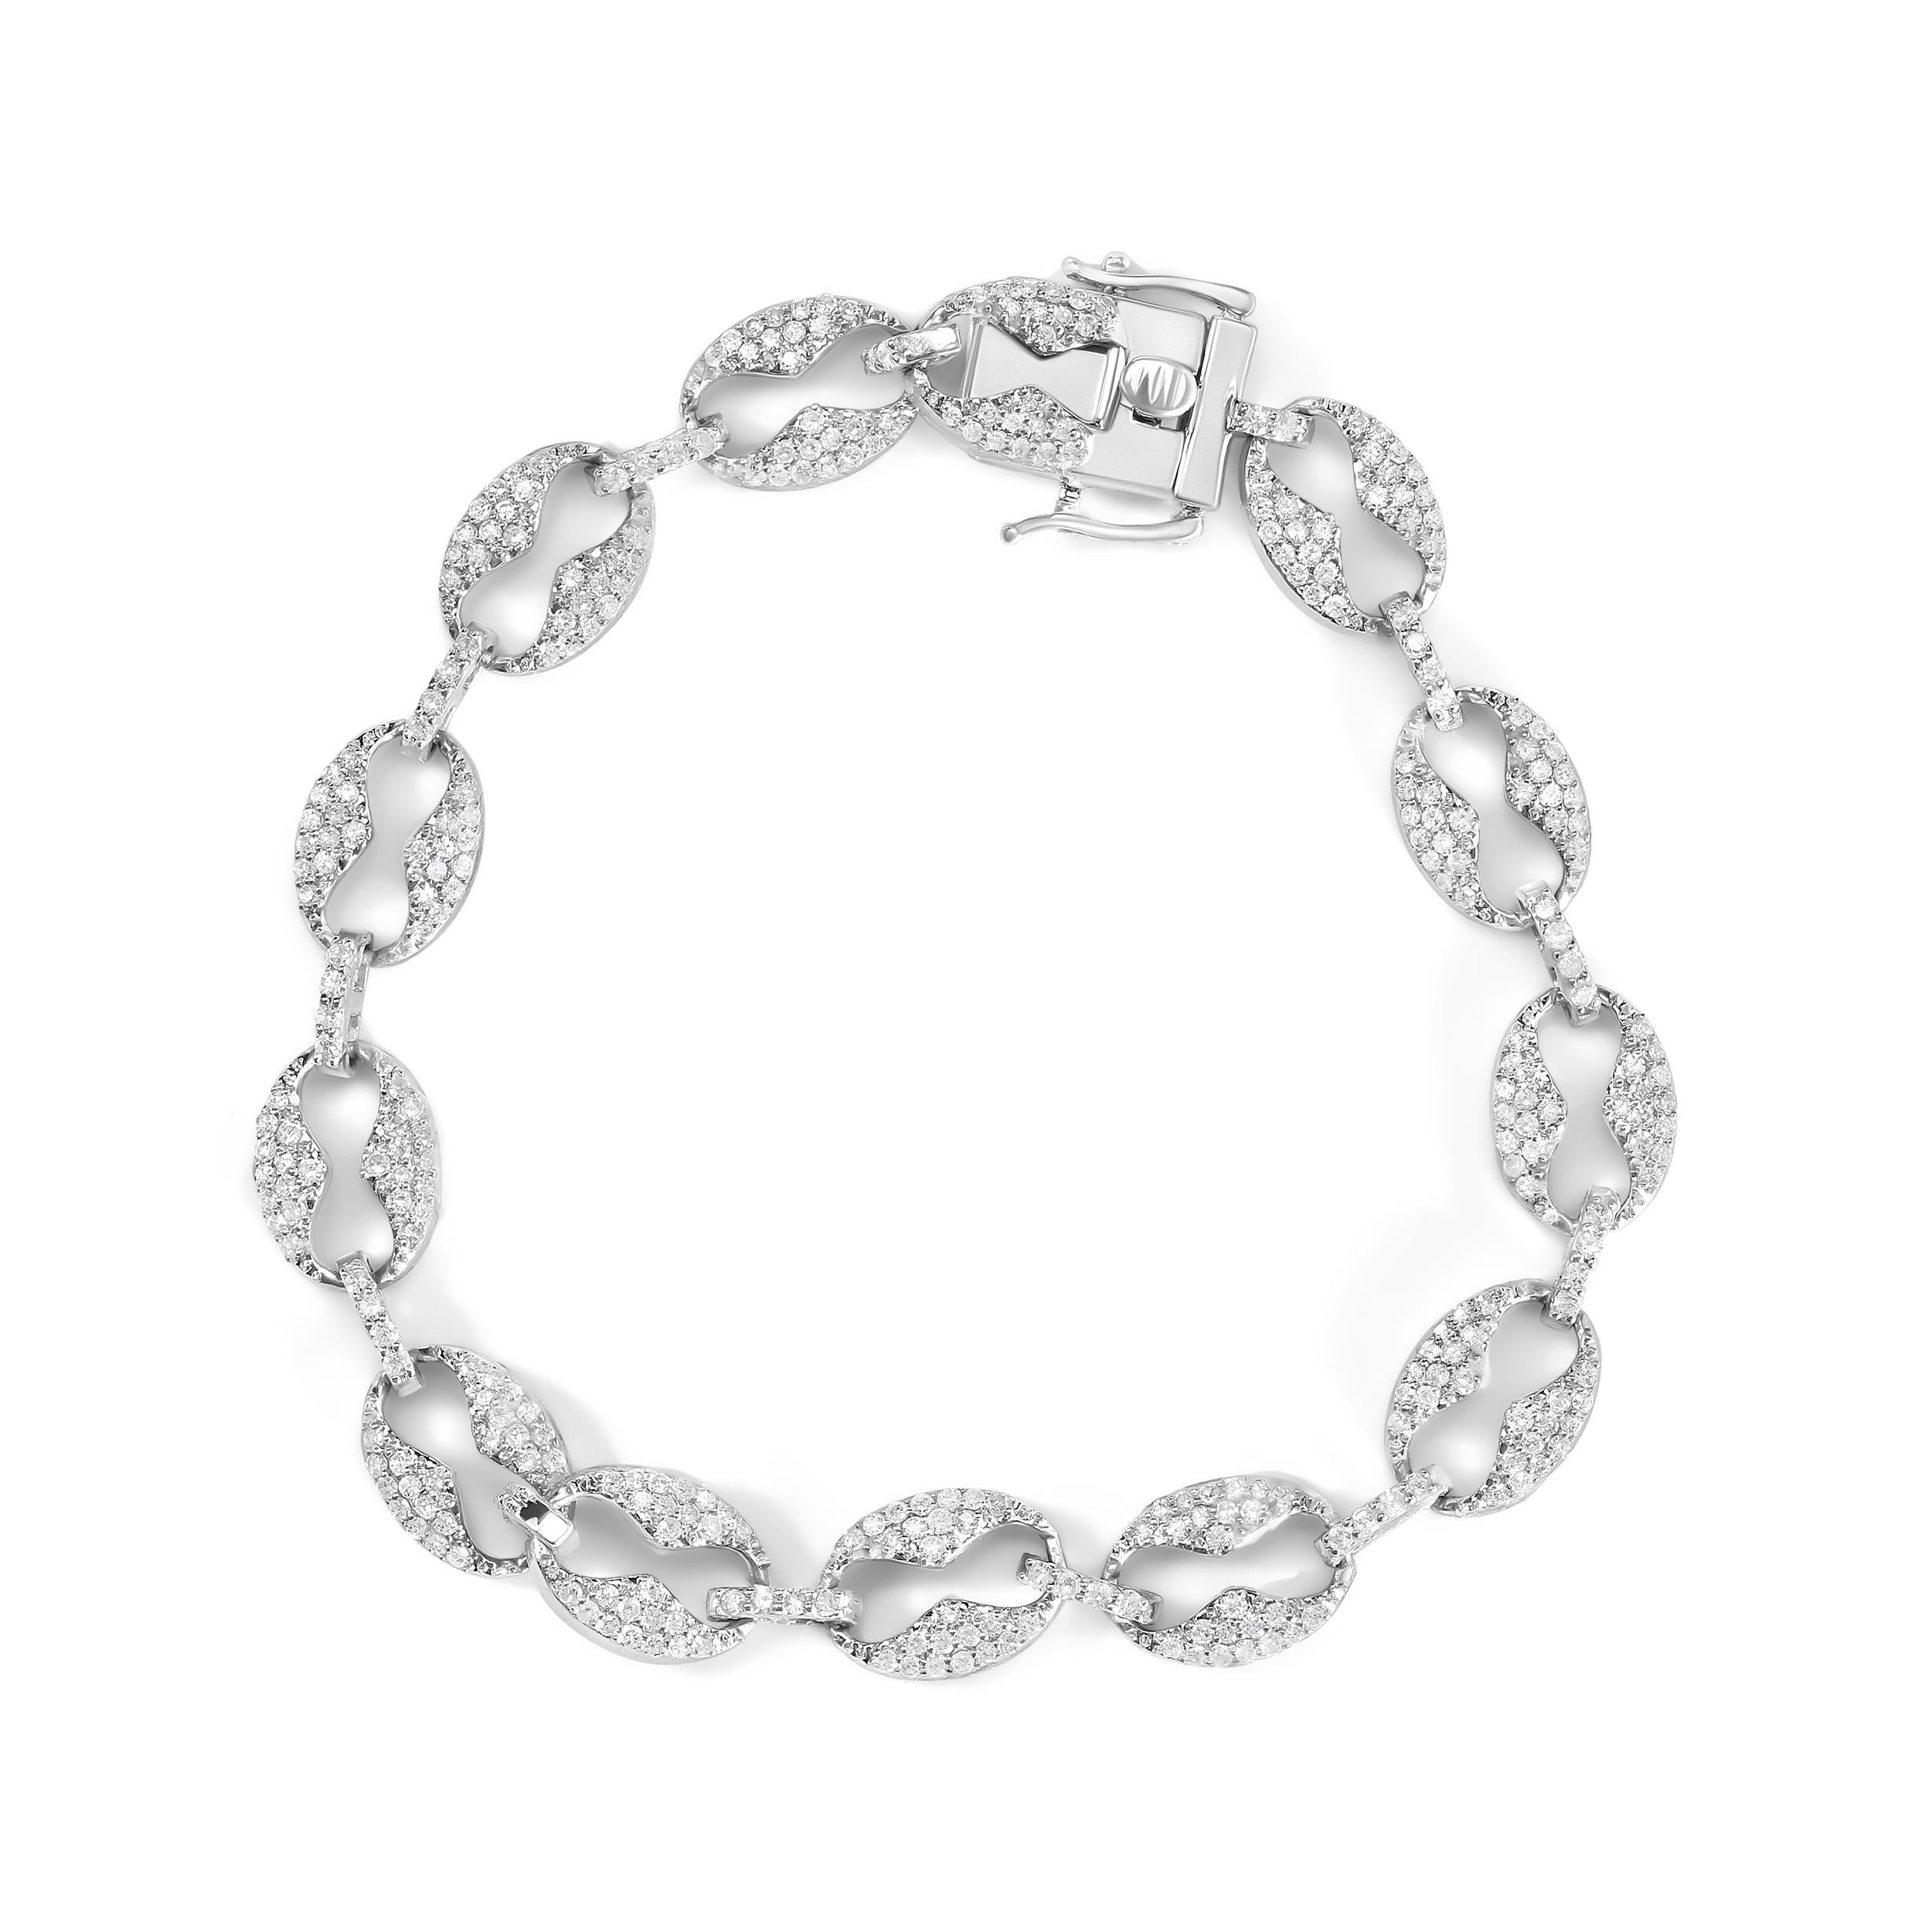 Adorn yourself with the exquisite beauty of this 14K White Gold Diamond Link Bracelet. The bracelet features 360 natural round-cut diamonds with an impressive 1.5 cttw weight that dazzle with their I-J color and I1-I2 clarity. Each diamond is